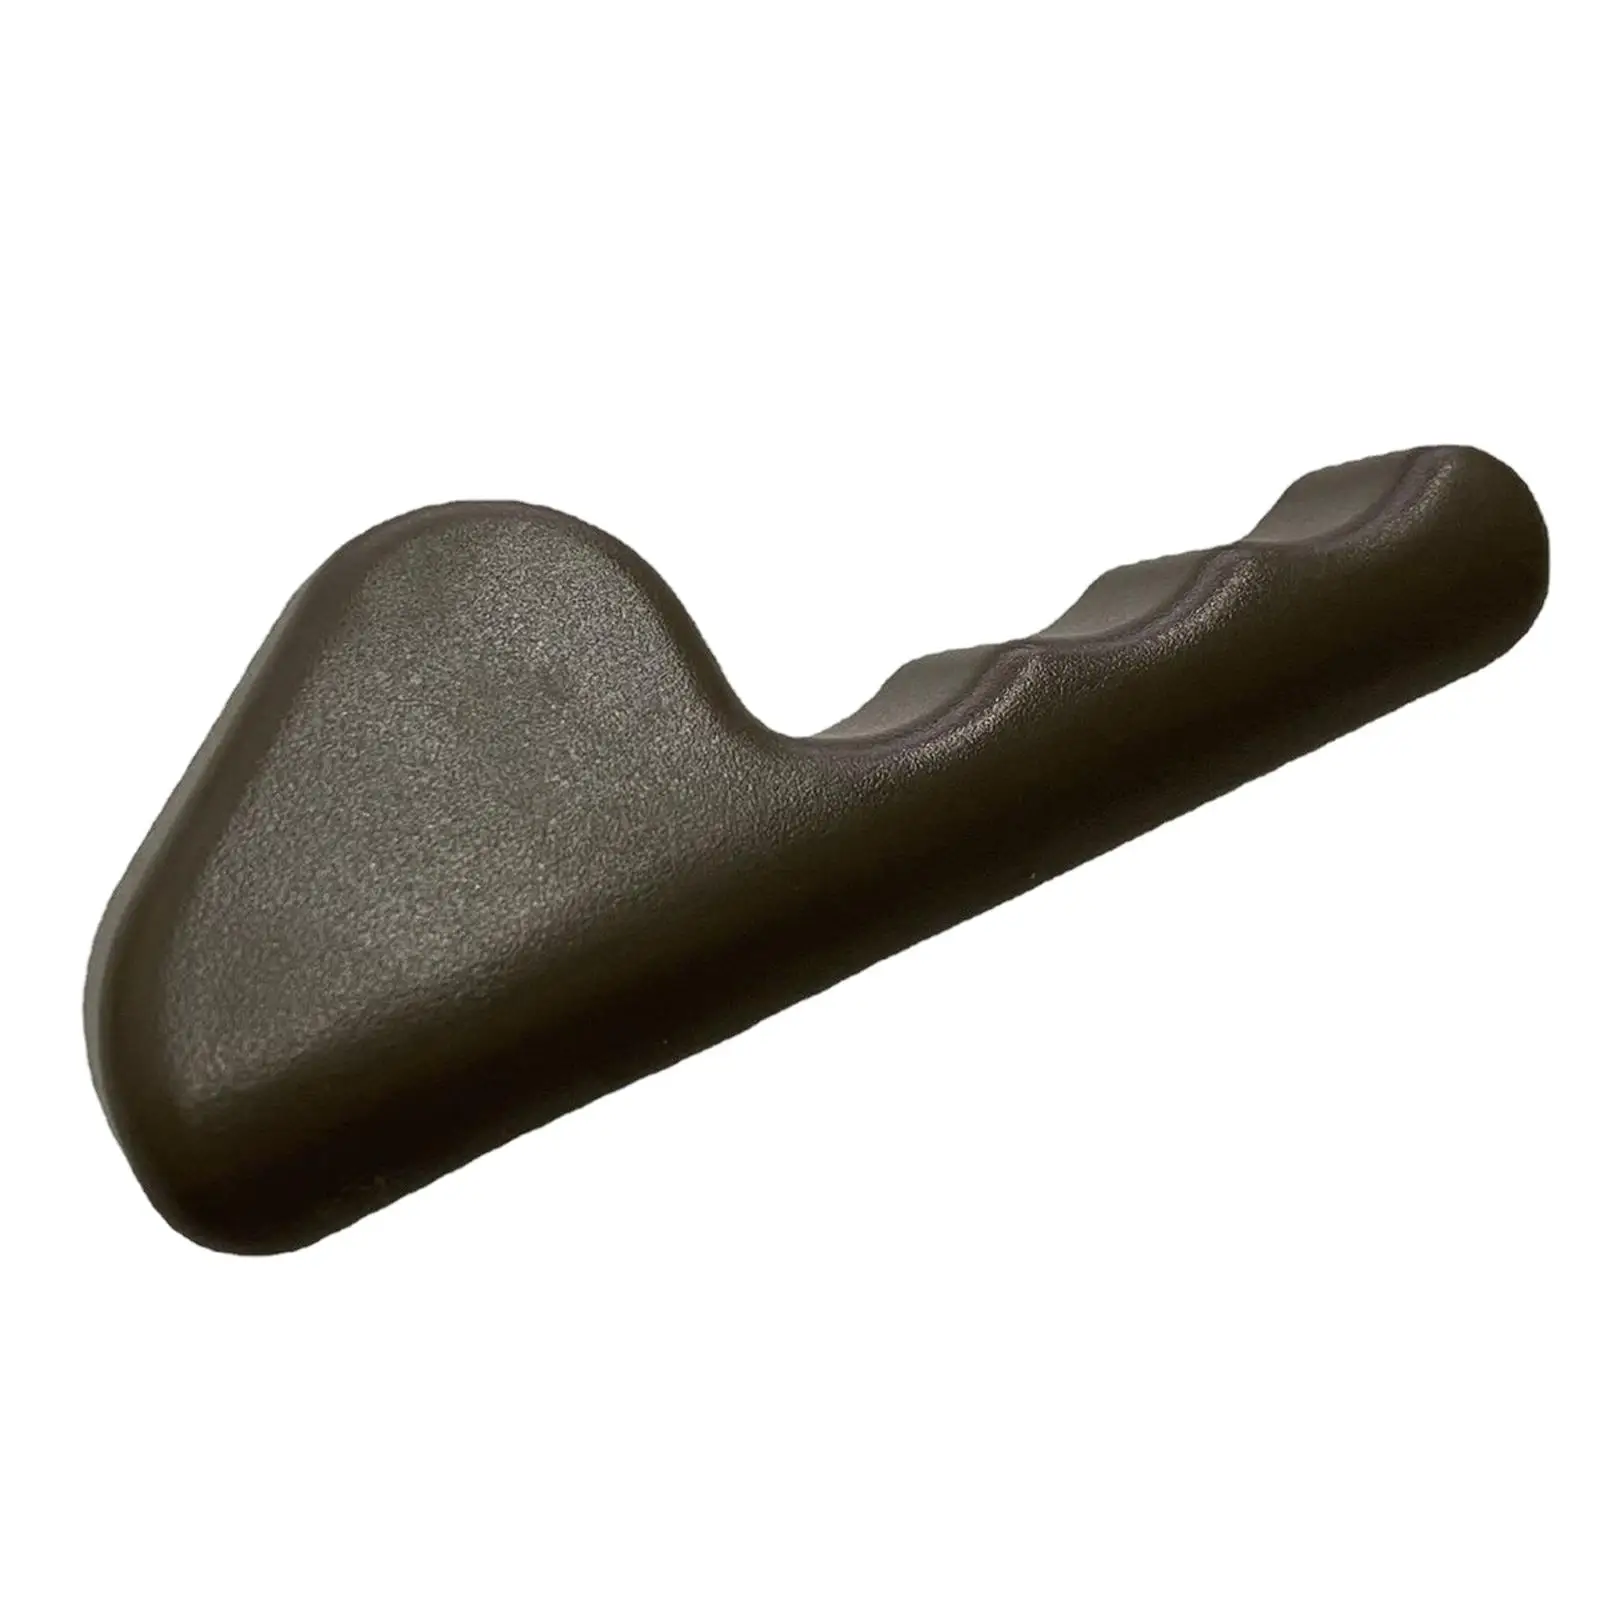 Seat recliner Lever Handle Replaces Seat Back Adjustment Handle for Explorer